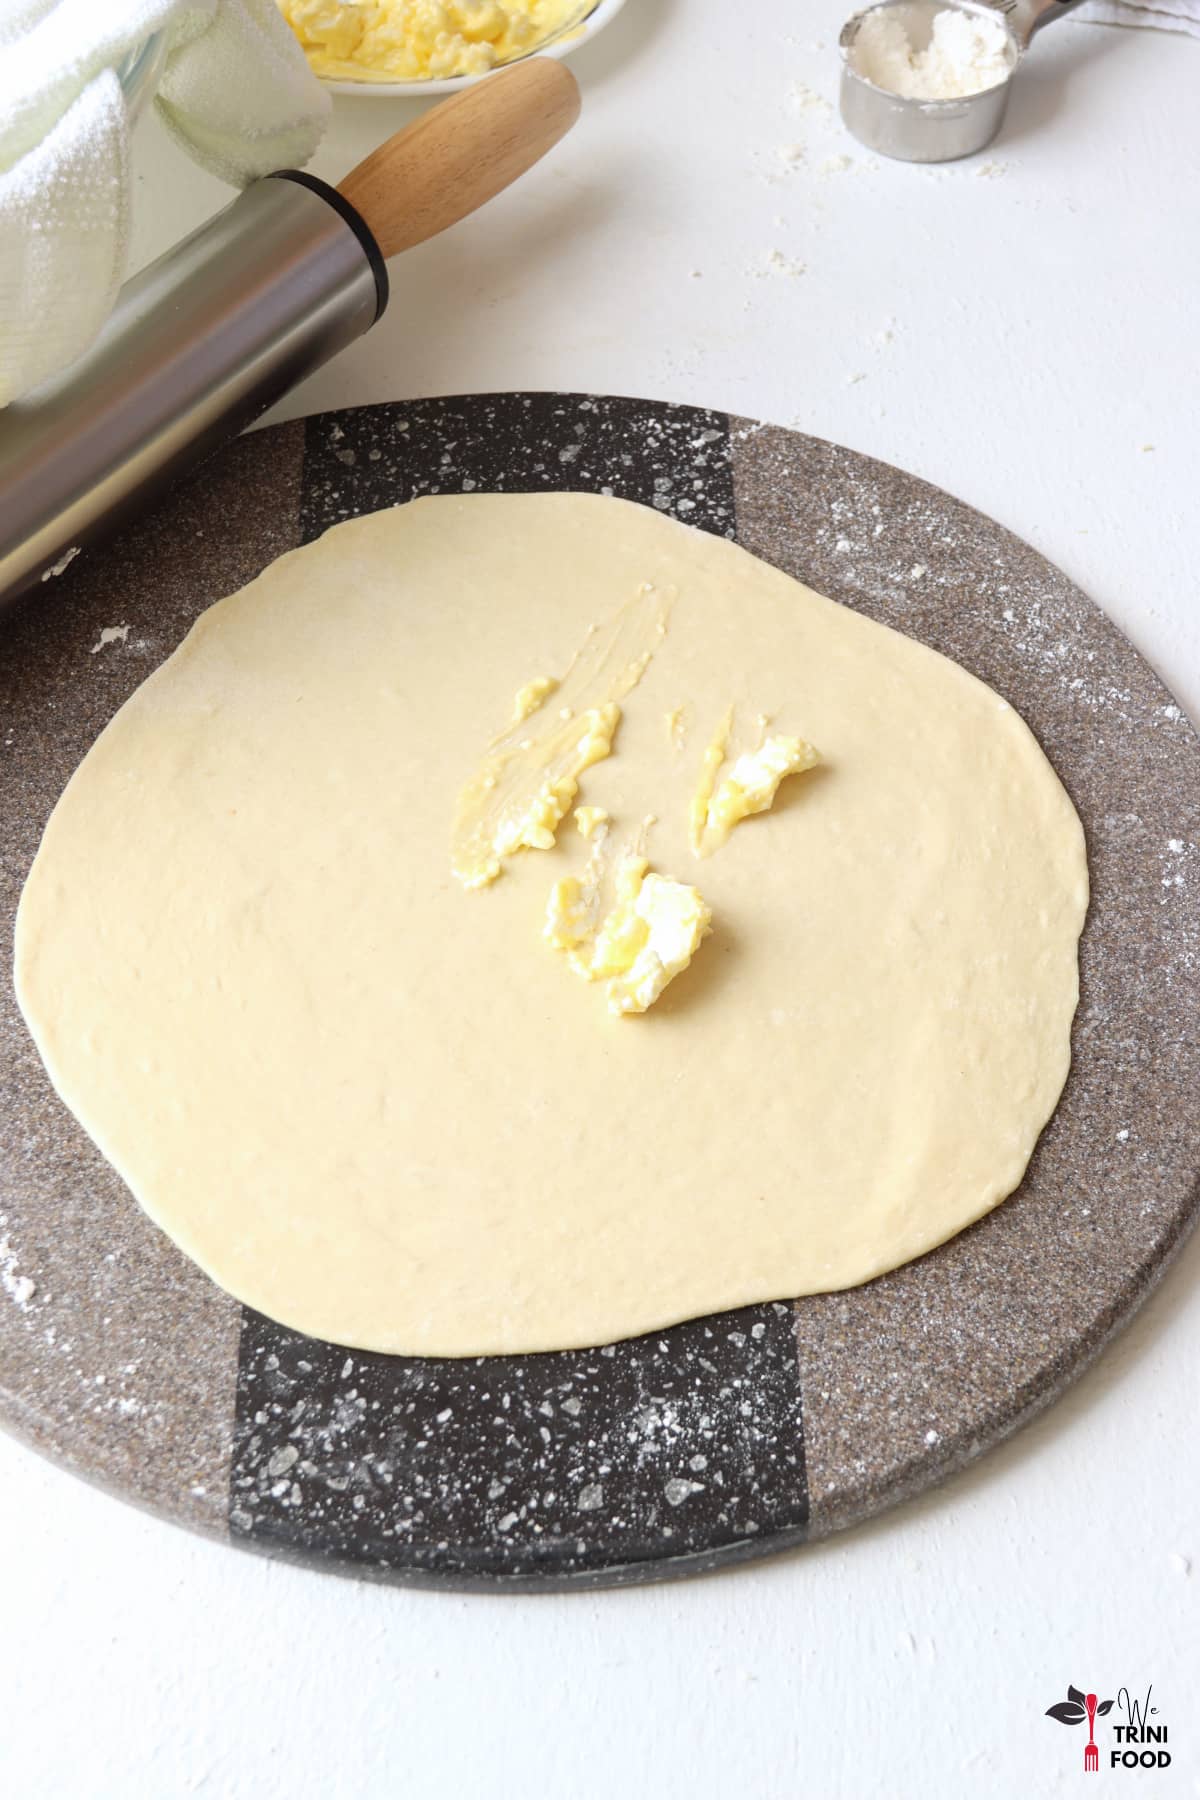 rolled out roti dough with butter and shortening mixture added on top with the rolling pin on the side